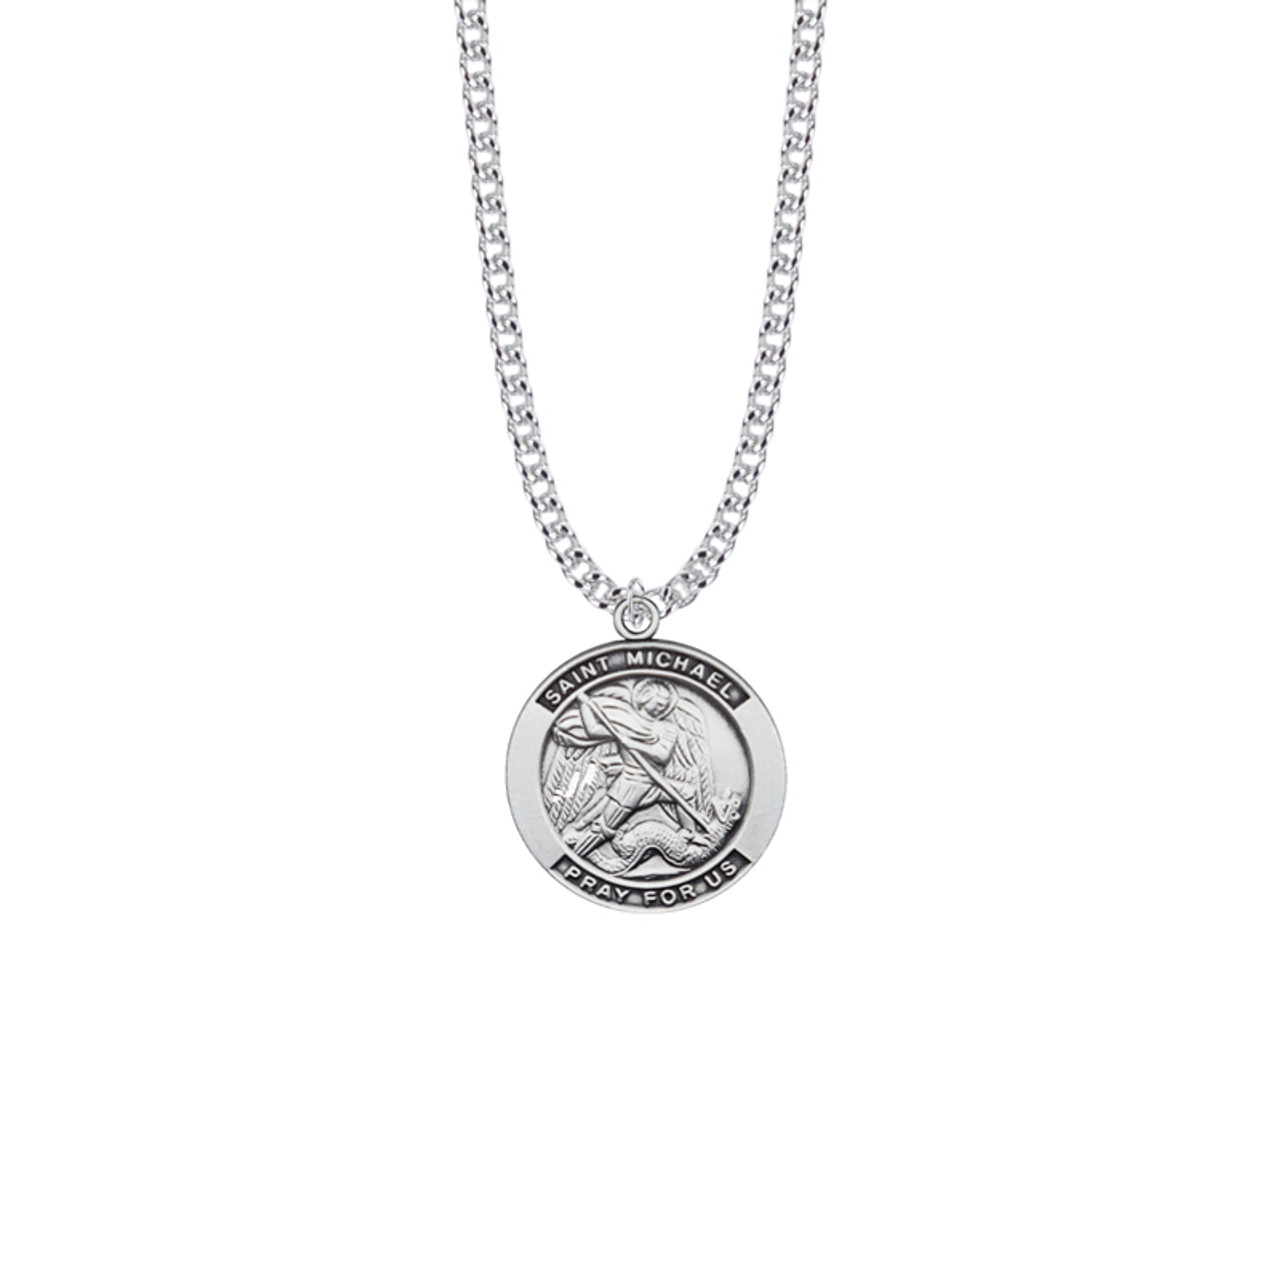 St Michael Necklace for Men, 925 Sterling Silver The Archangel Saint  Michael Pendant Catholic Medals Necklace Protect Us Jewelry for Dad  Boyfriend Teens Boys 22+2 Inch | Amazon.com